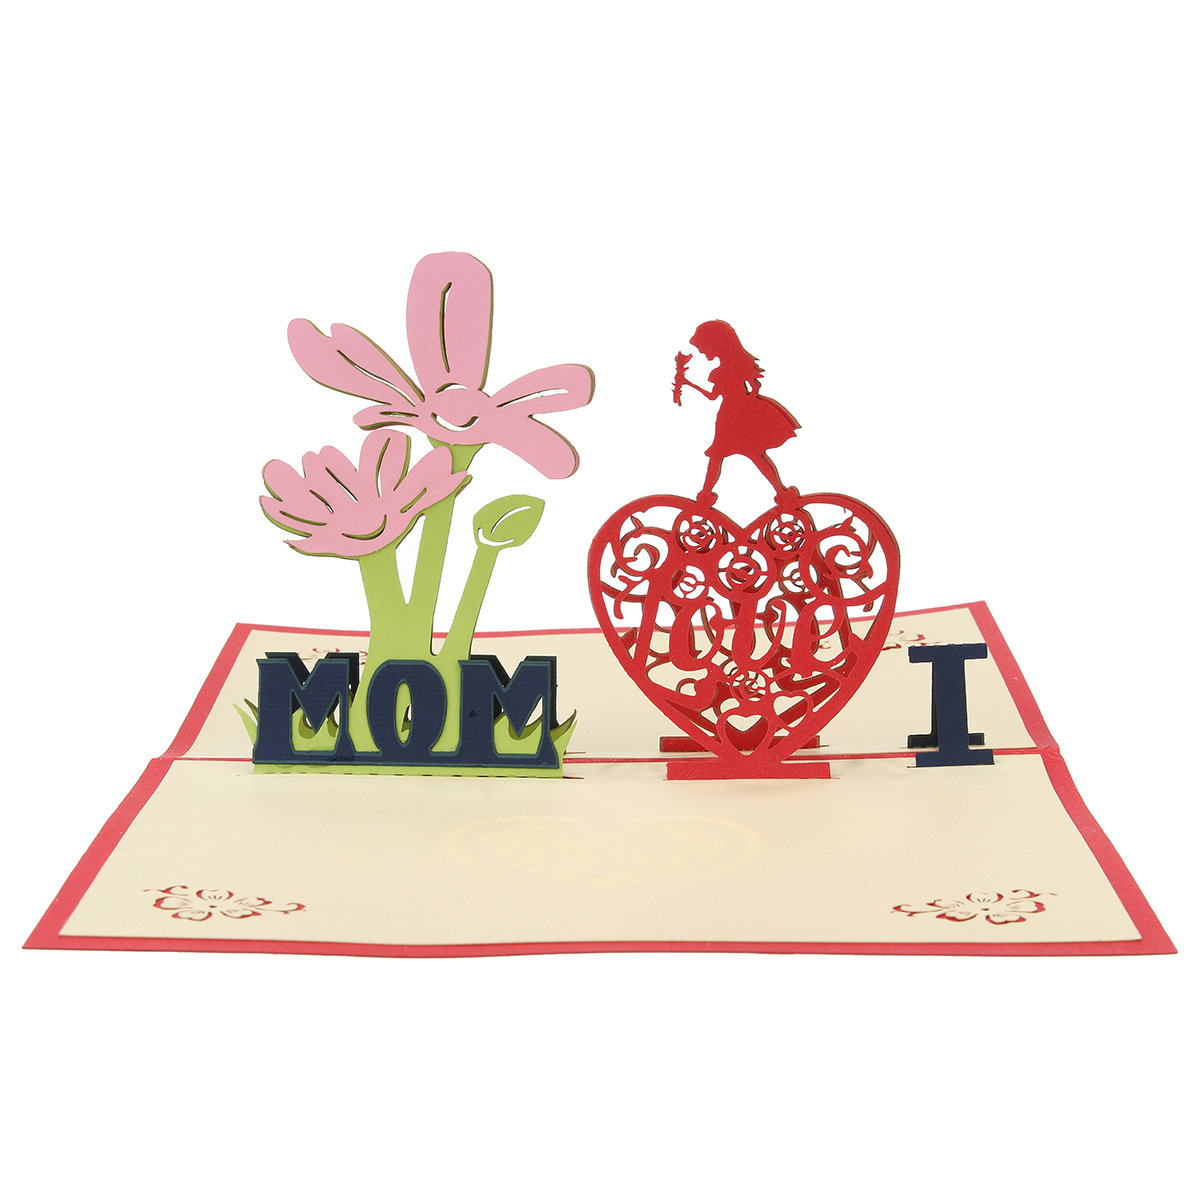 

3D Mothers' Day Gift Card